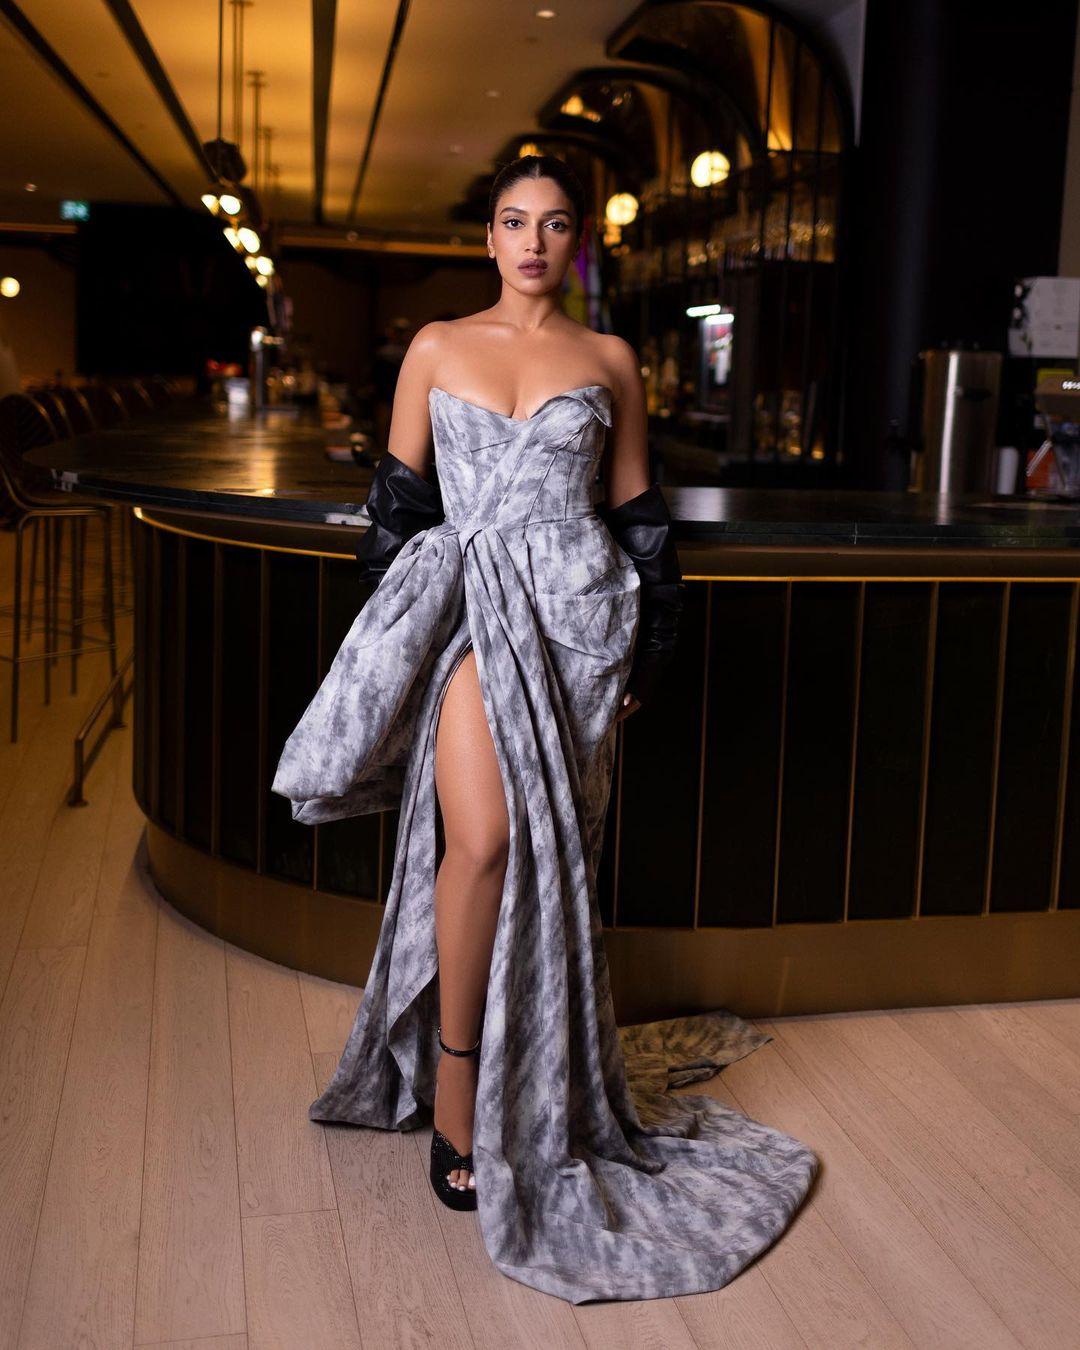 The talented actress dazzled in an exquisite gown from the luxury clothing brand, Toni Maticevski. The gown boasted a plunging neckline, a tailored bodice, an eye-catching oversized bow pattern at the waist, and a daring thigh-high slit, adding a dash of allure to her ensemble. 